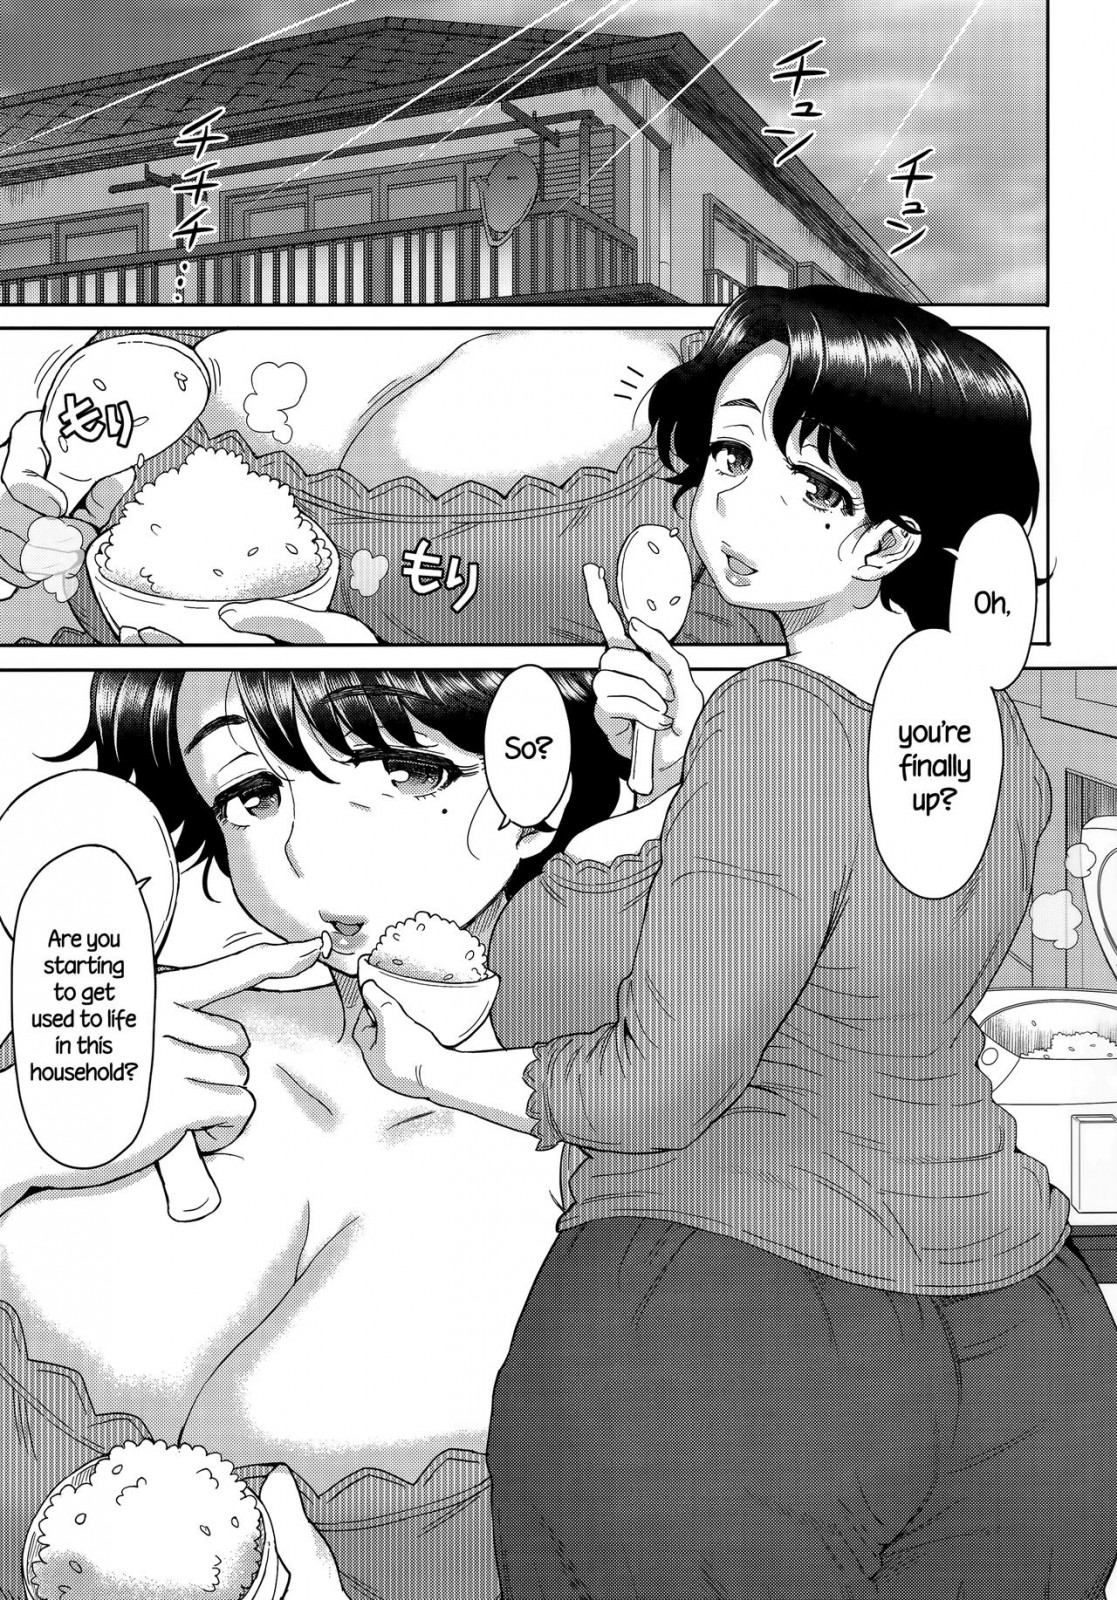 Hentai Manga Comic-My Daily Life Relieving My Sexual Urges in the Ashitaba Family Household-Read-2